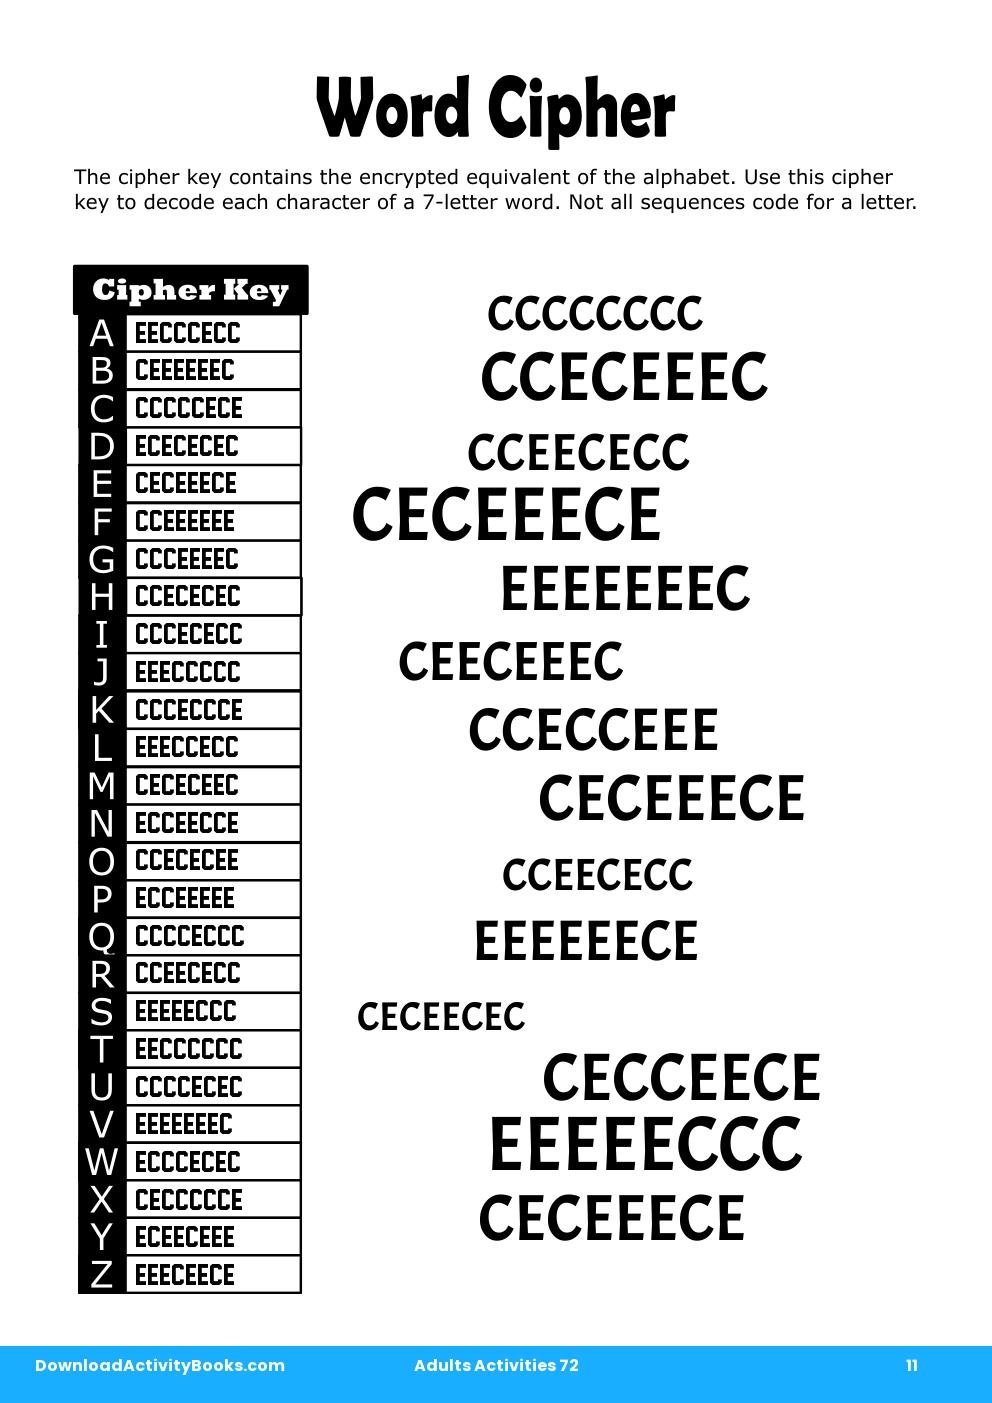 Word Cipher in Adults Activities 72